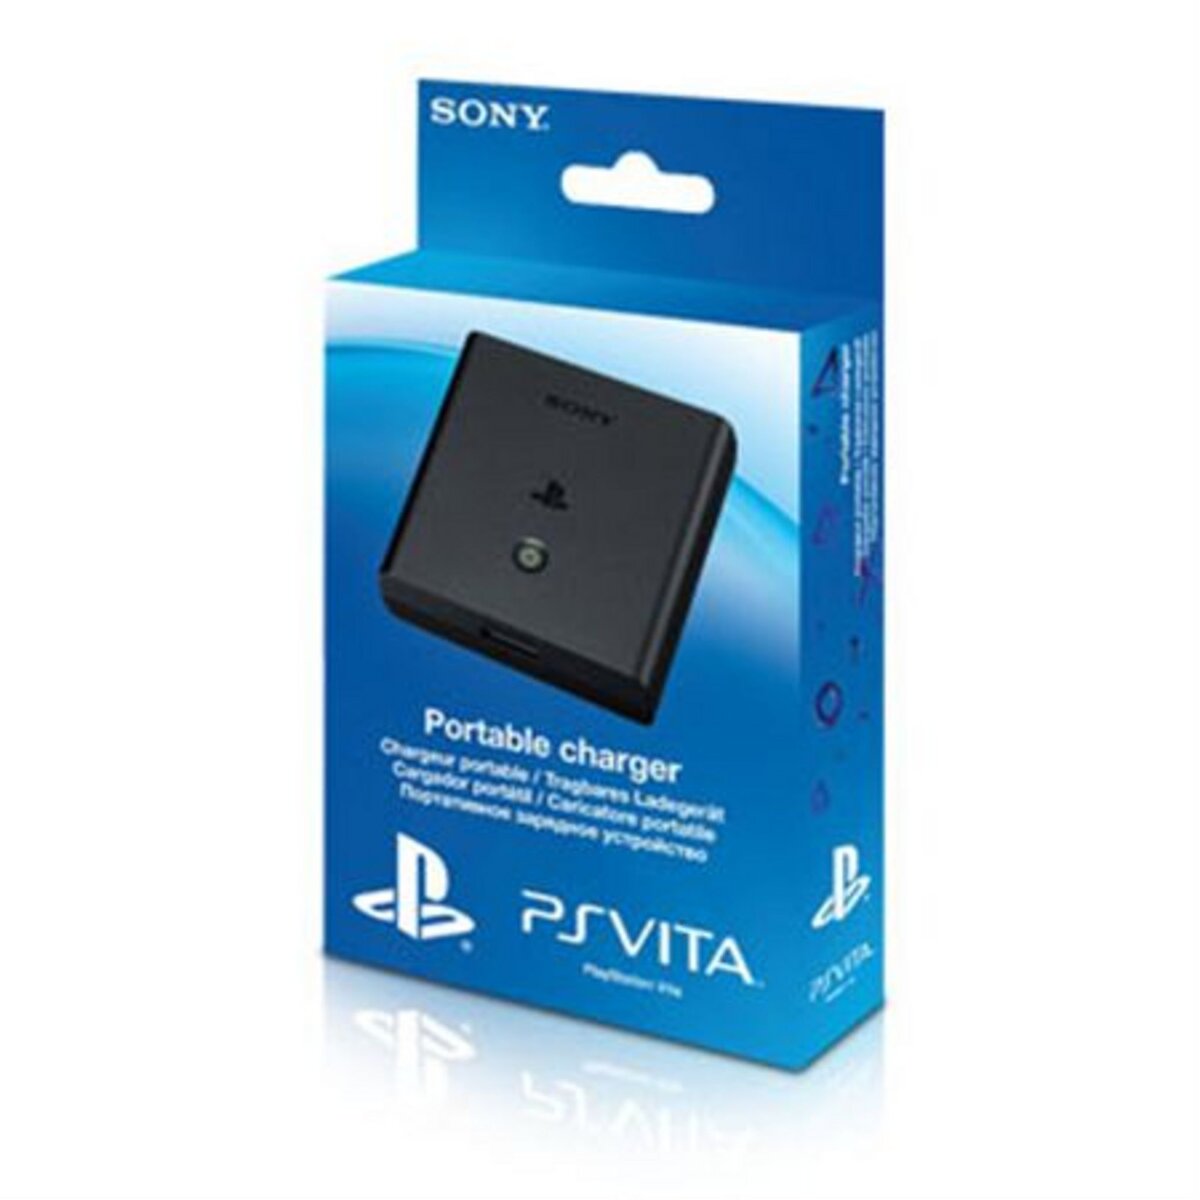 SONY Chargeur portable PS Vita